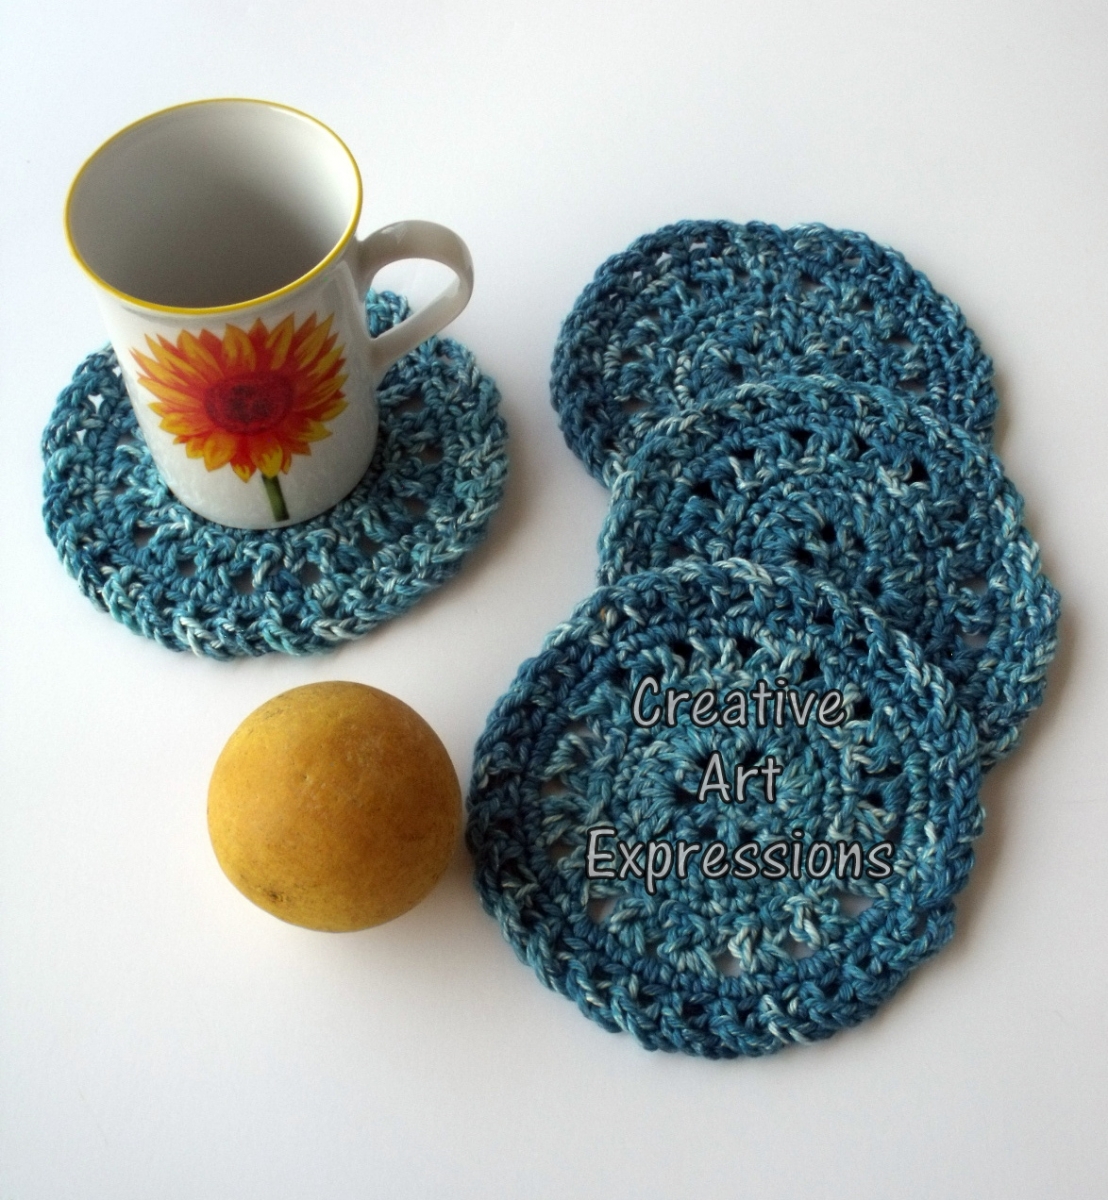 Teal Round Cotton Crocheted Coasters